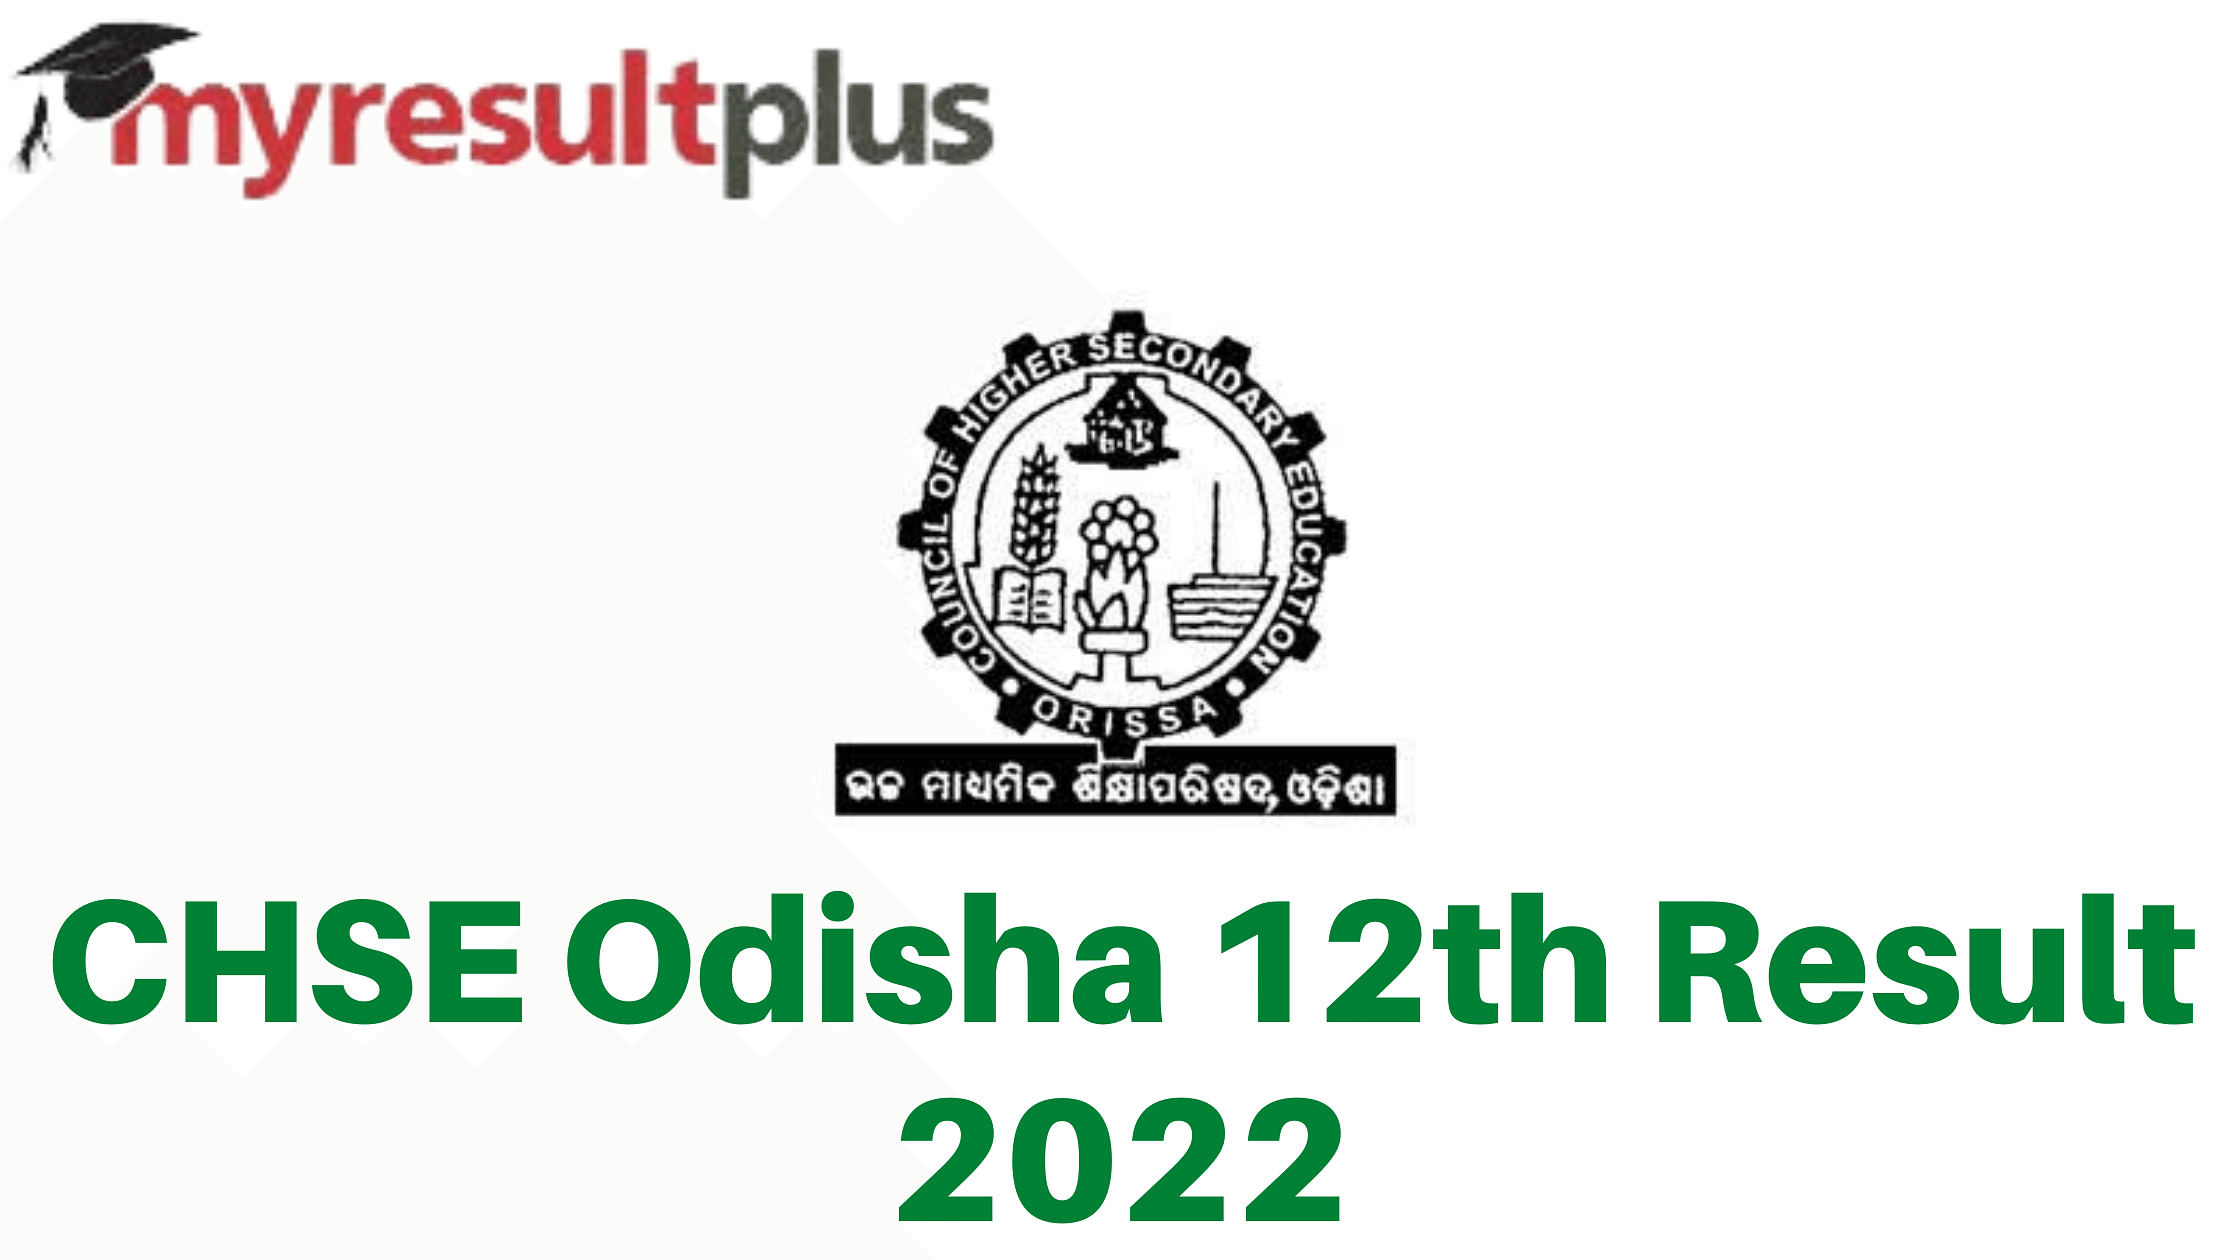 CHSE Odisha 12th Result 2022 For Arts To be Declared On This Date, List Of Websites To Check Here